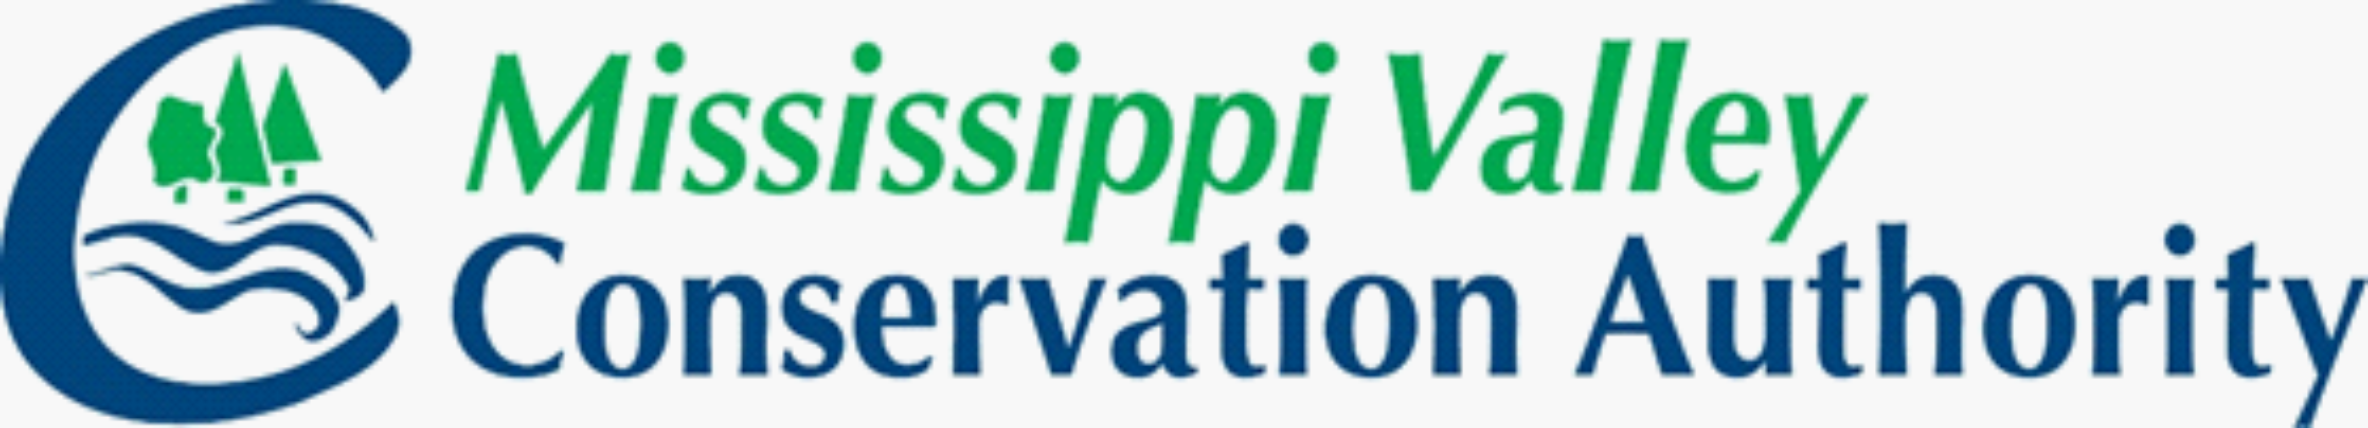 Organization logo of Mississippi Valley Conservation Authority